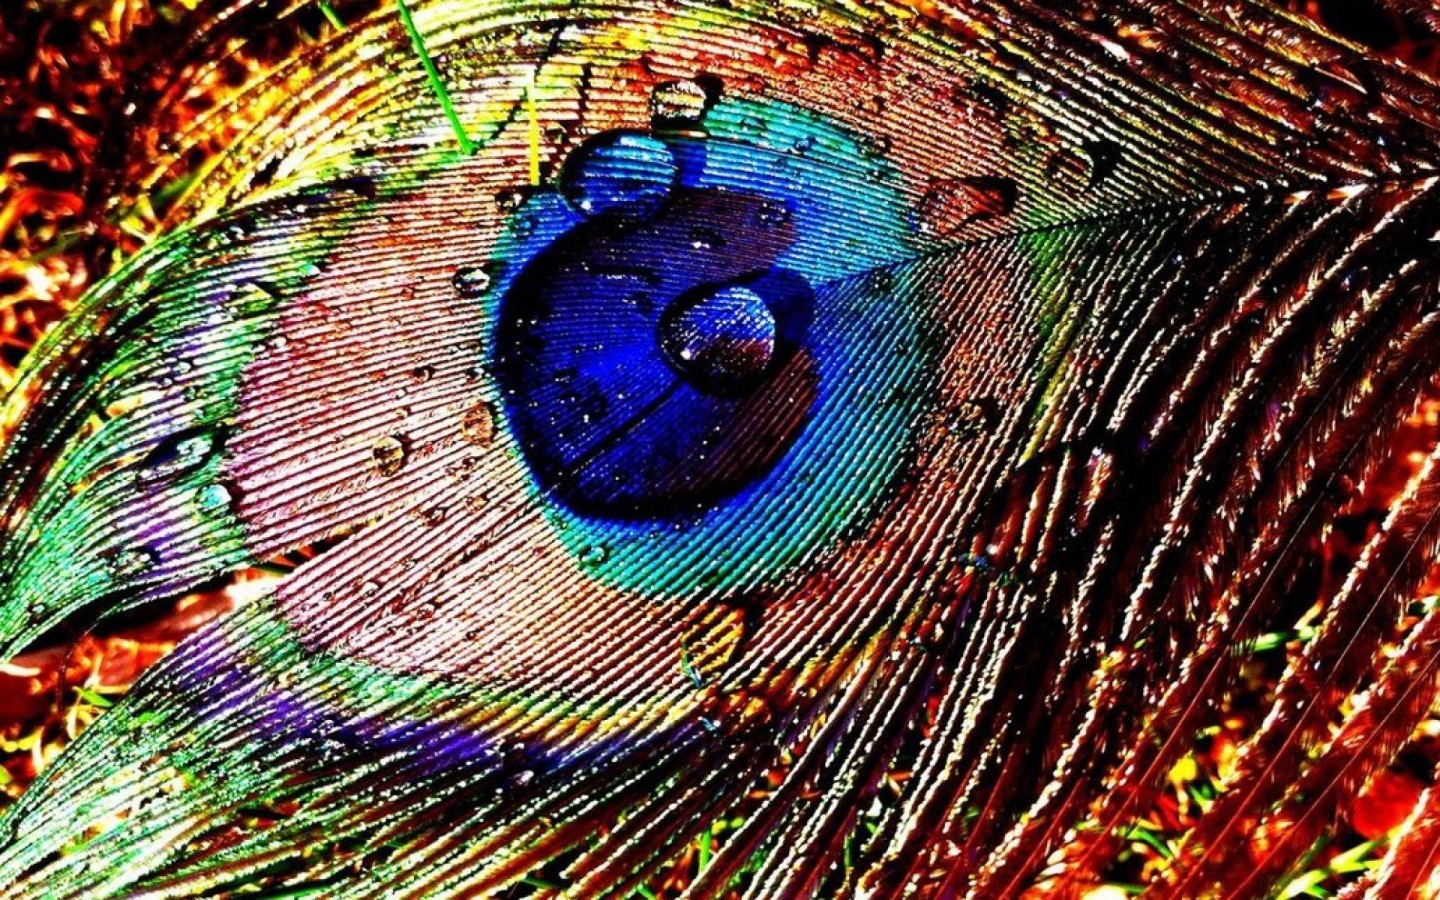 feather live wallpaper,feather,eye,close up,colorfulness,organ